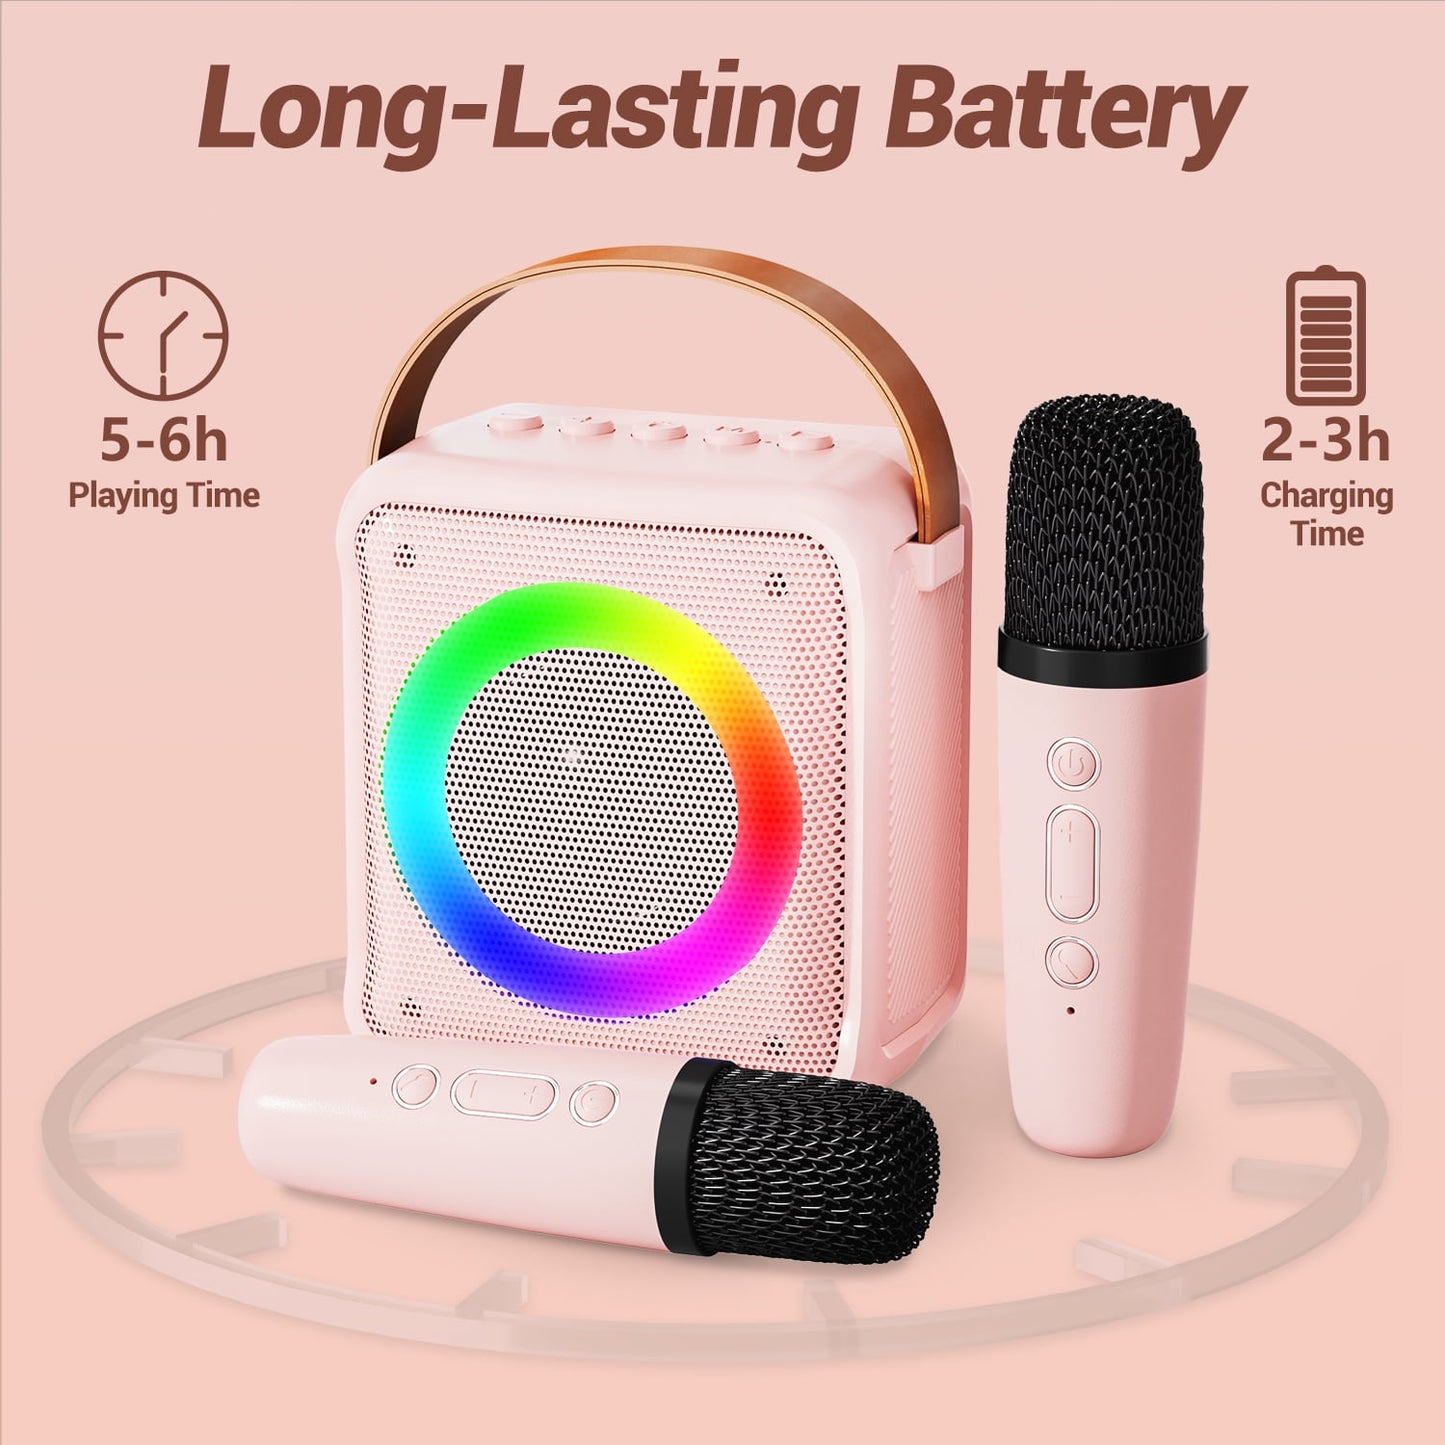 BONAOK Karaoke Machine for Kids Adults, Portable Bluetooth Speaker with 2 Wireless Mics, Microphone Speaker Set with LED Lights for Home Party, Birthday Gifts for Girls Boys(Pink)